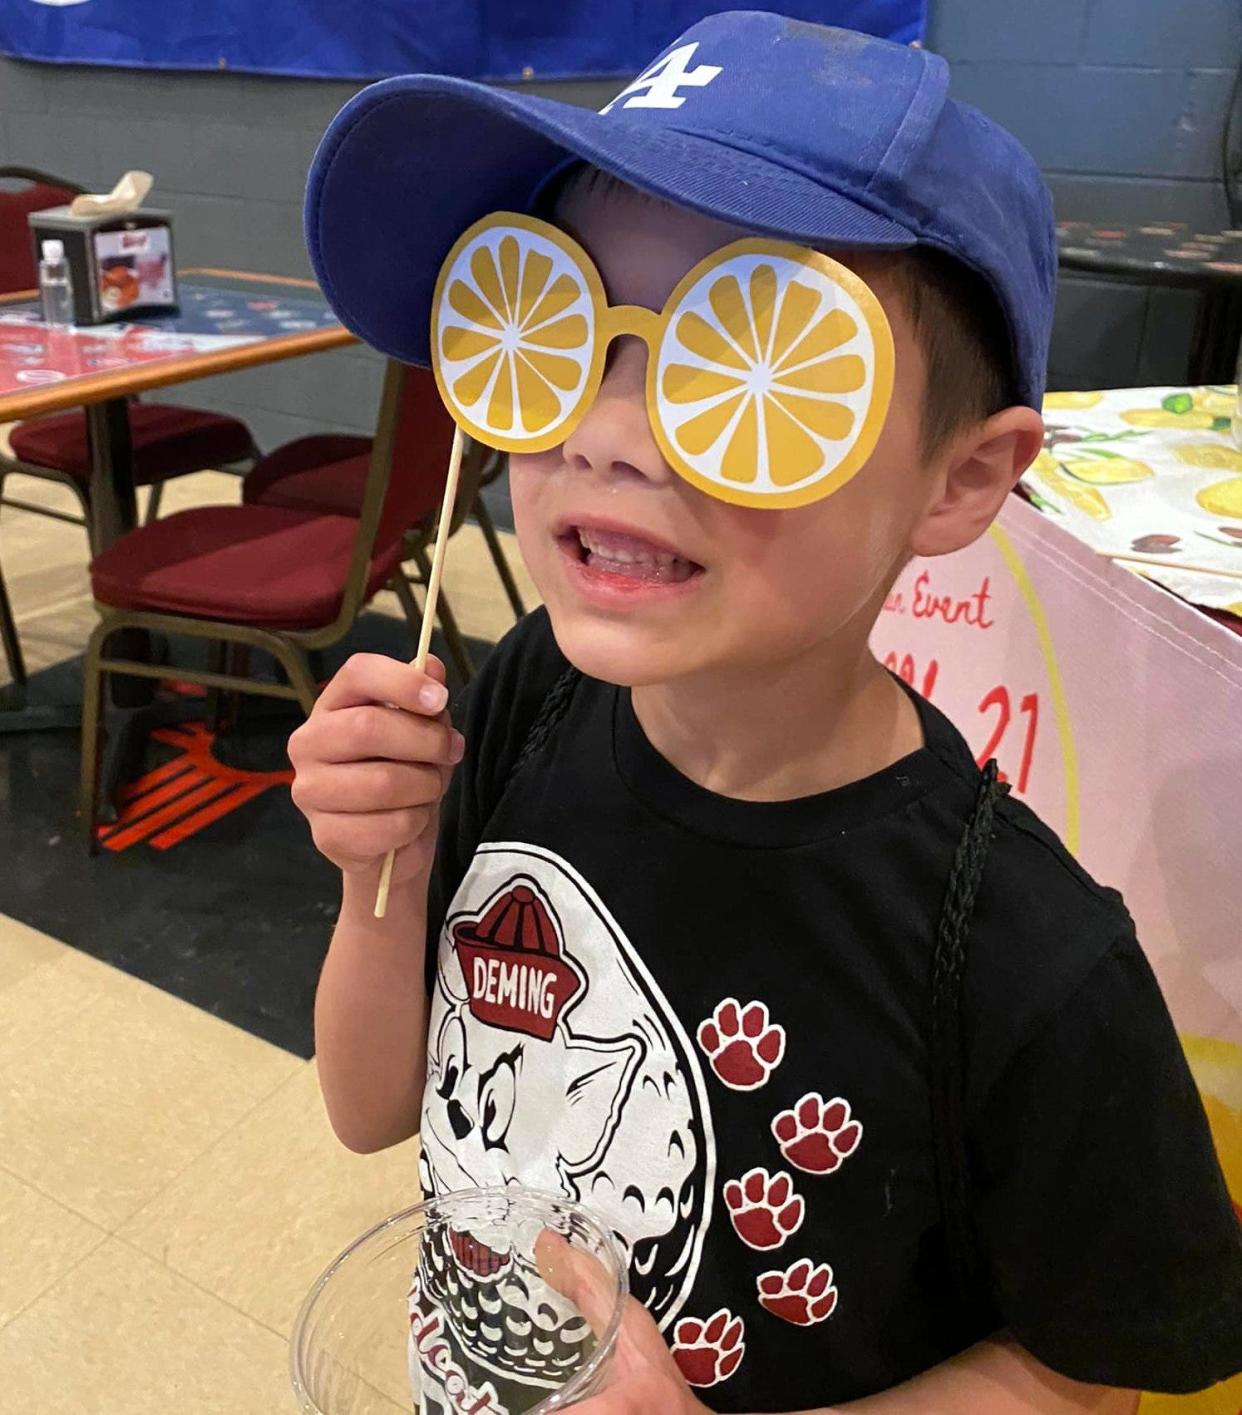 Lemonade Day is Saturday in Deming and Luna County. Look for lemonade stands through the city and county to quench your thirst and support young entrepreneurs.